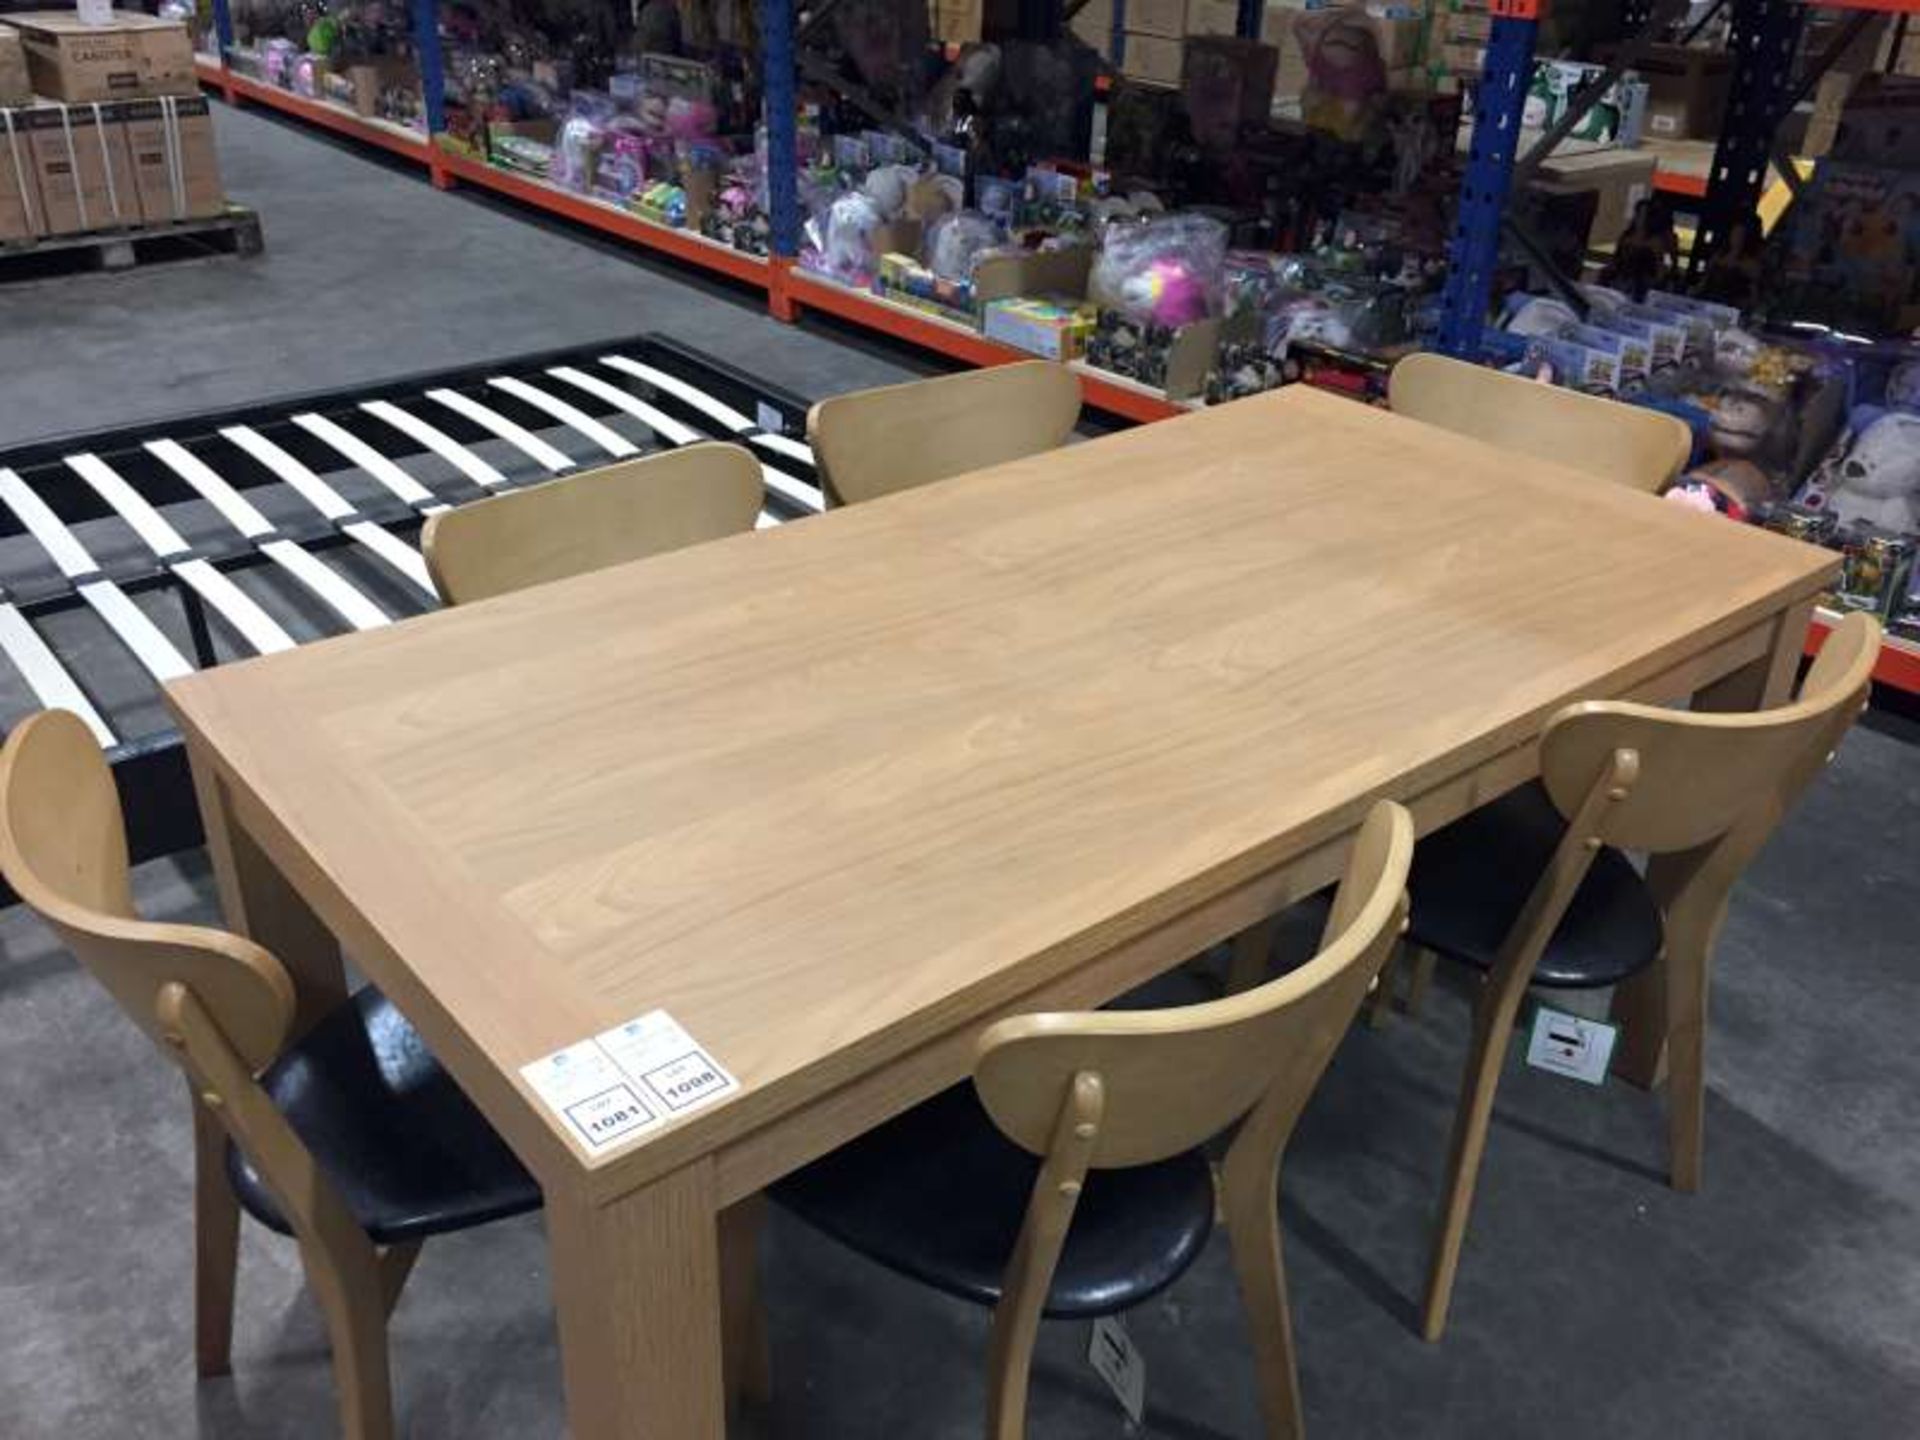 BRAND NEW BOXED HEMSLEY EXTENDING DINING TABLE SIZE WIDTH 160 - 200 CM, DEPTH 80 CM, HEIGHT 75 CM